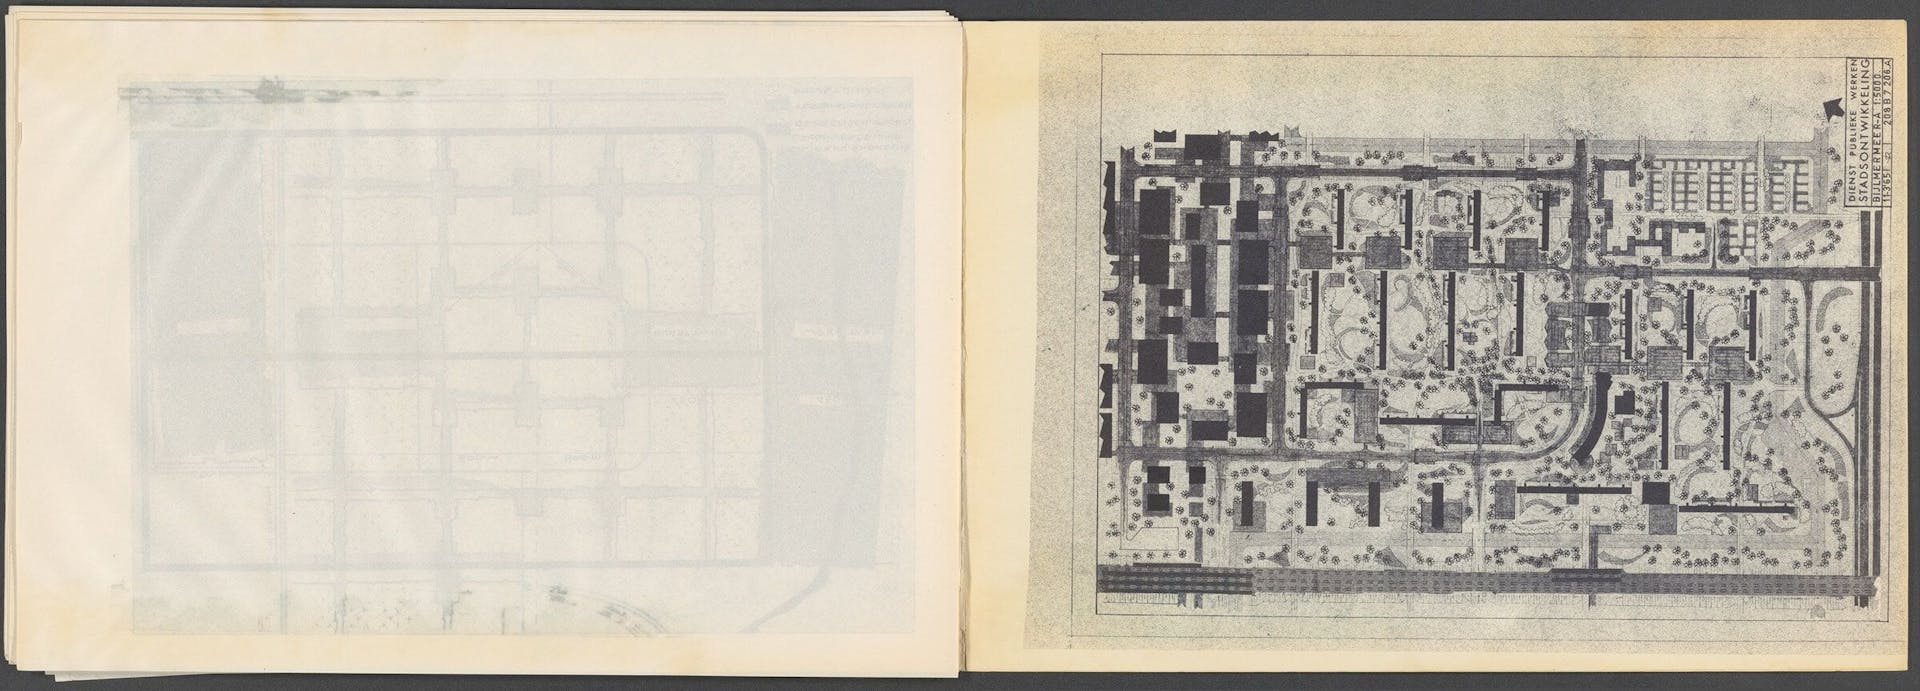 Bijlmermeer presentation booklet, c.1962. Collection Het Nieuwe Instituut, Siegfried Nassuth archive. Several presentation drawings in Nassuth’s archive show that an enormous area around Bijlmermeer – about 248 hectares – was set aside for… 